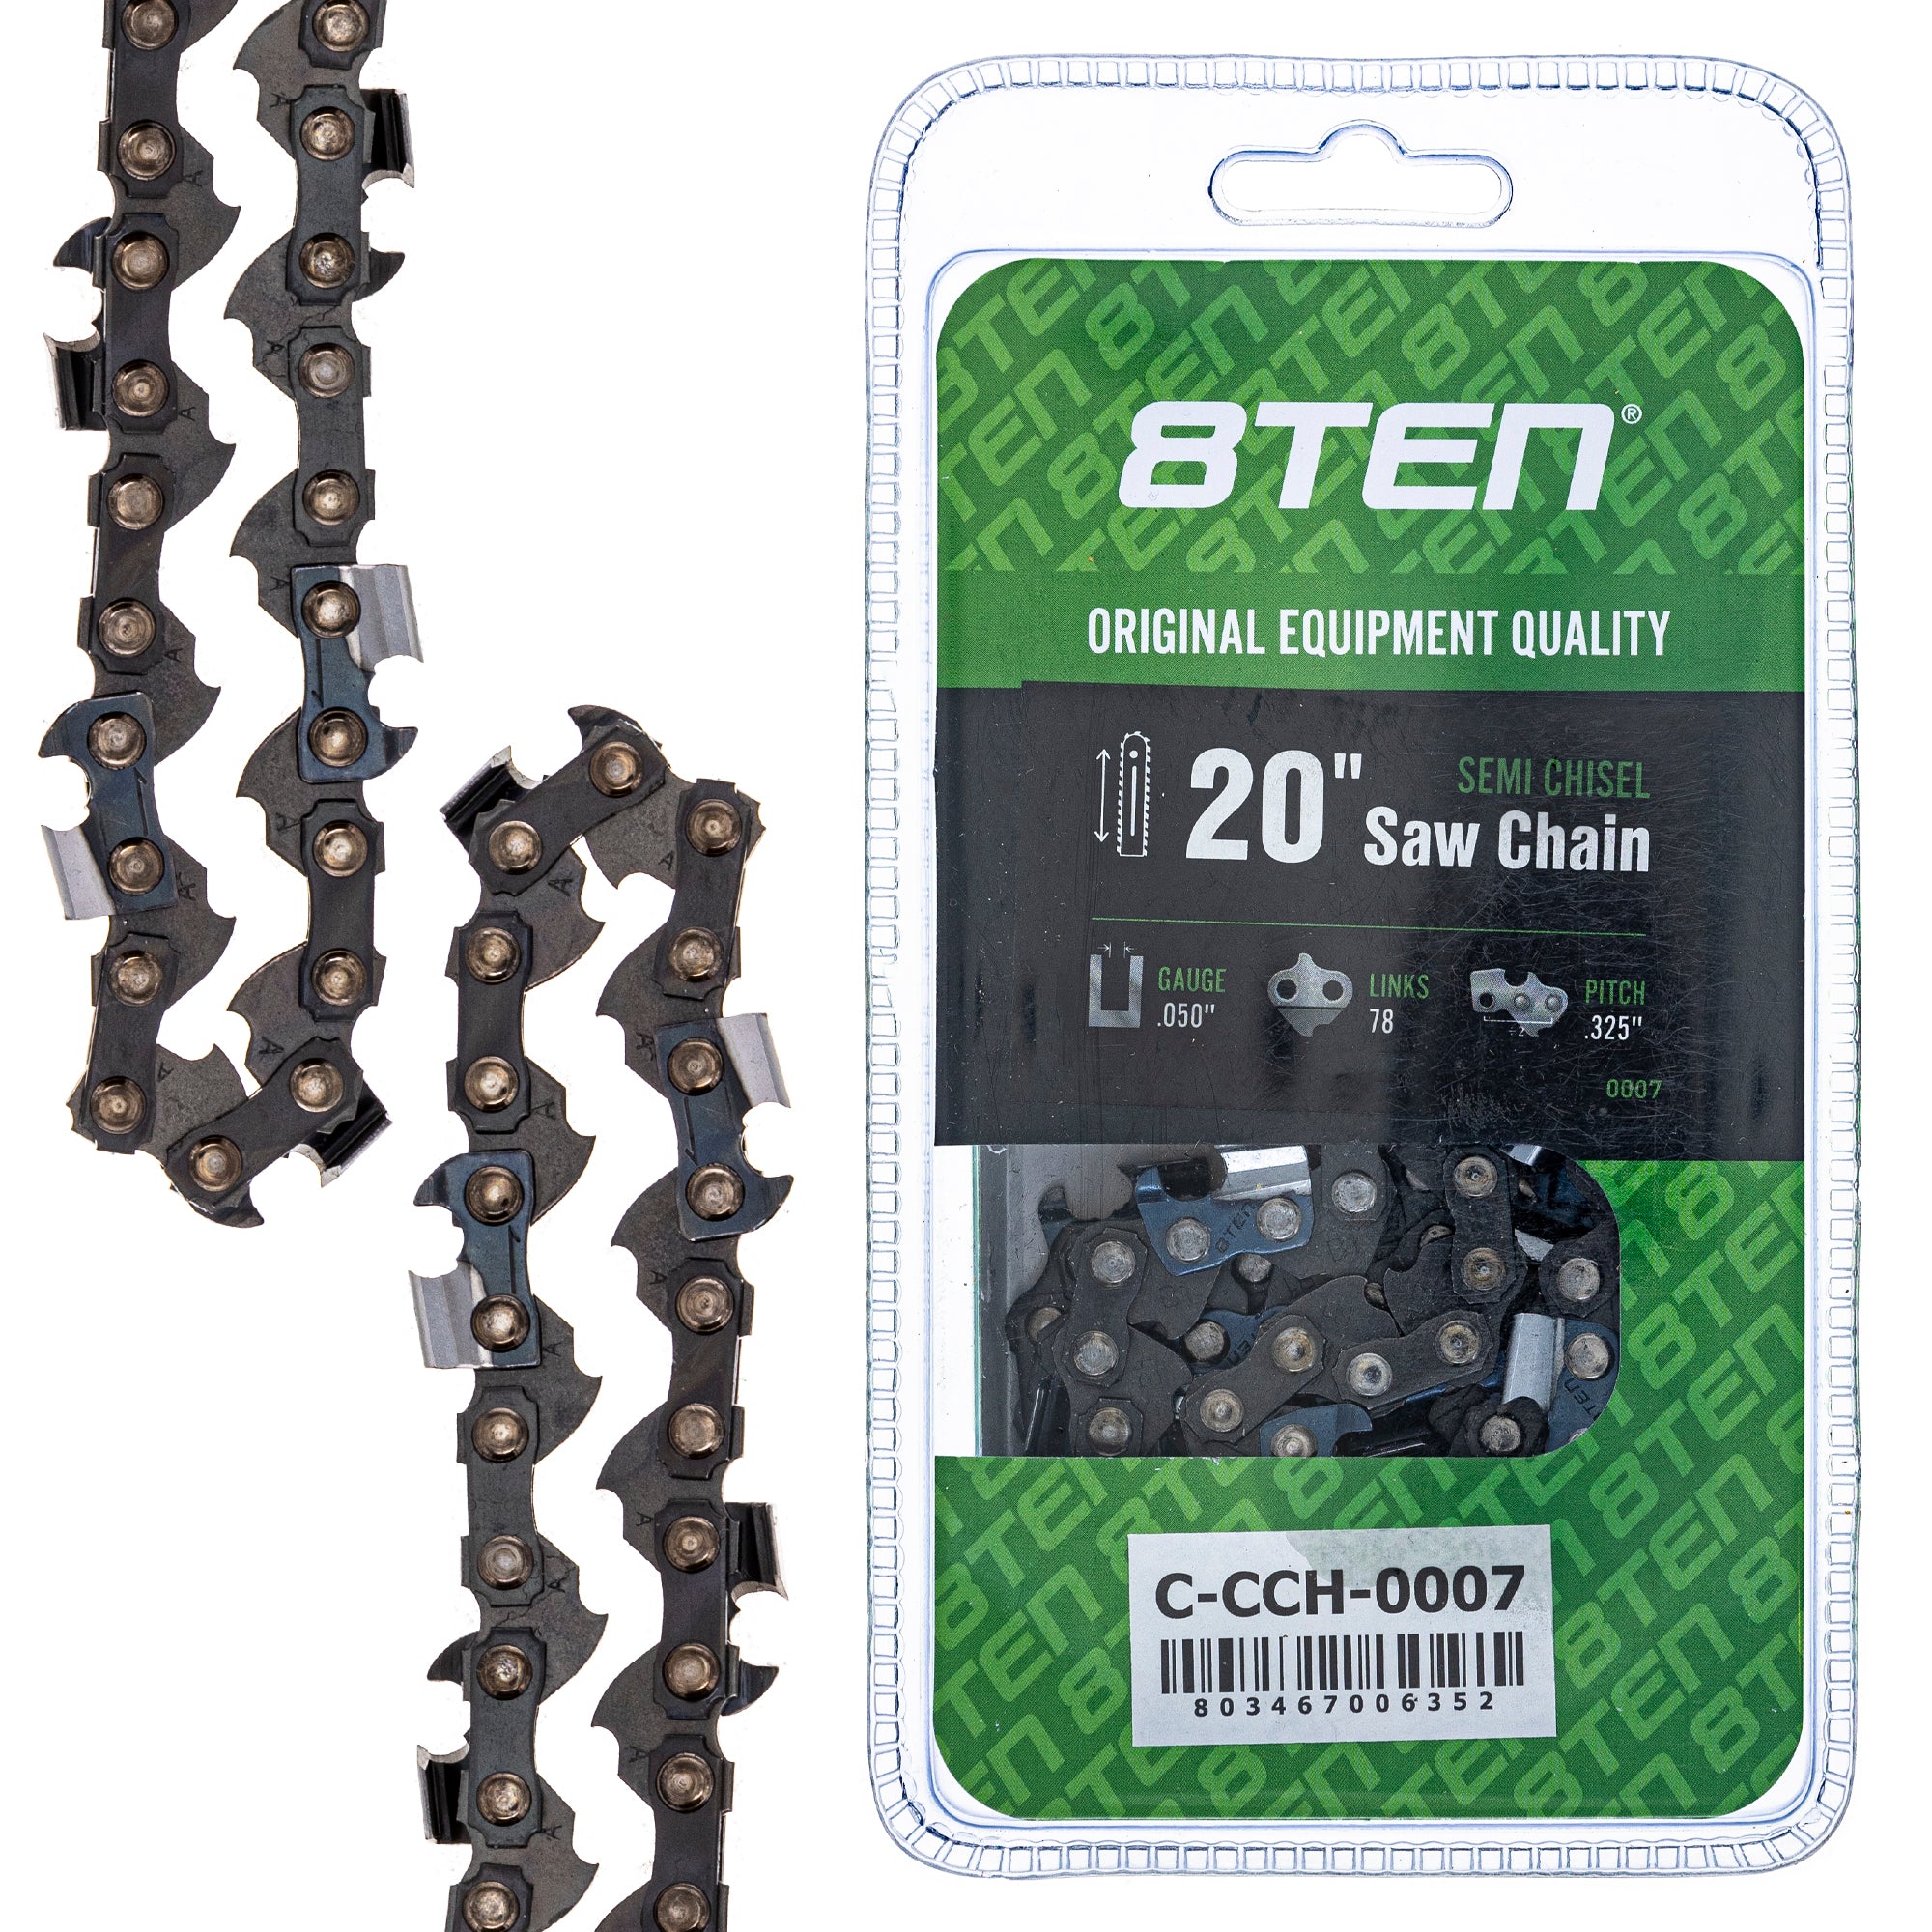 Chainsaw Chain 20 Inch .050 .325 78DL for zOTHER Windsor Stens Sabre McCulloch Carlton 520 8TEN 810-CCC2229H